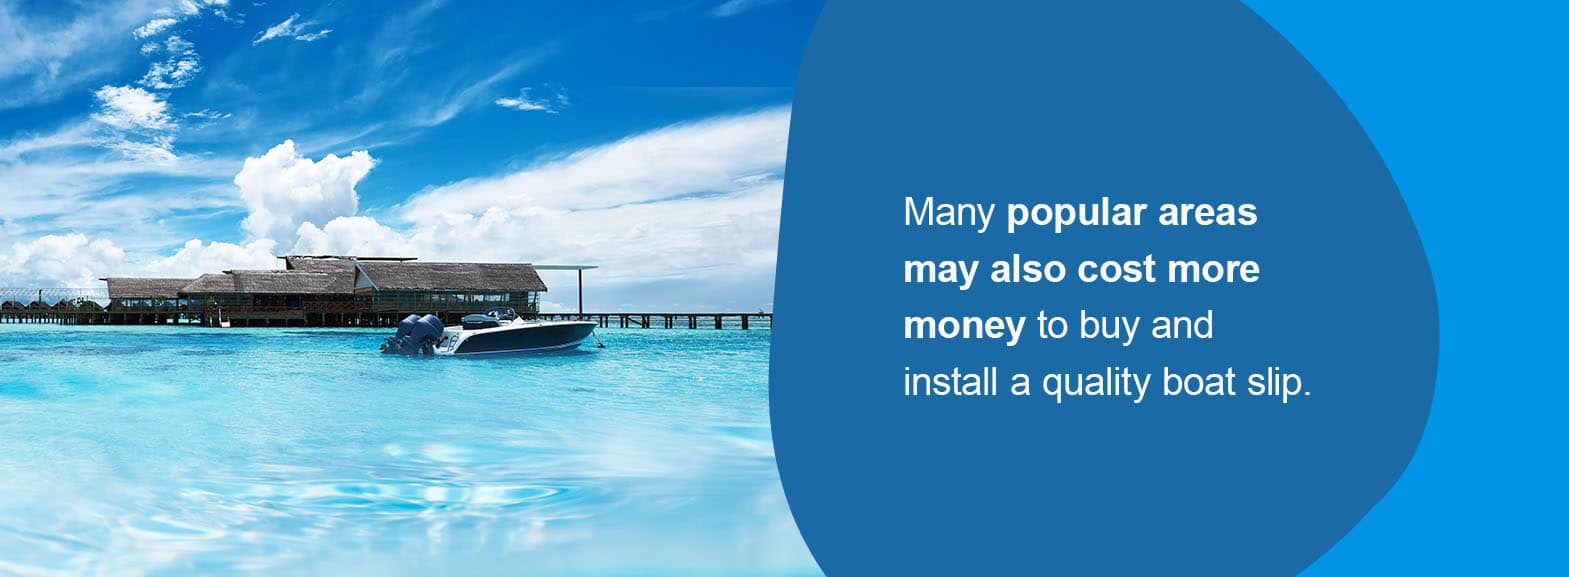 Many popular areas may also cost more money to buy and install a quality boat slip.